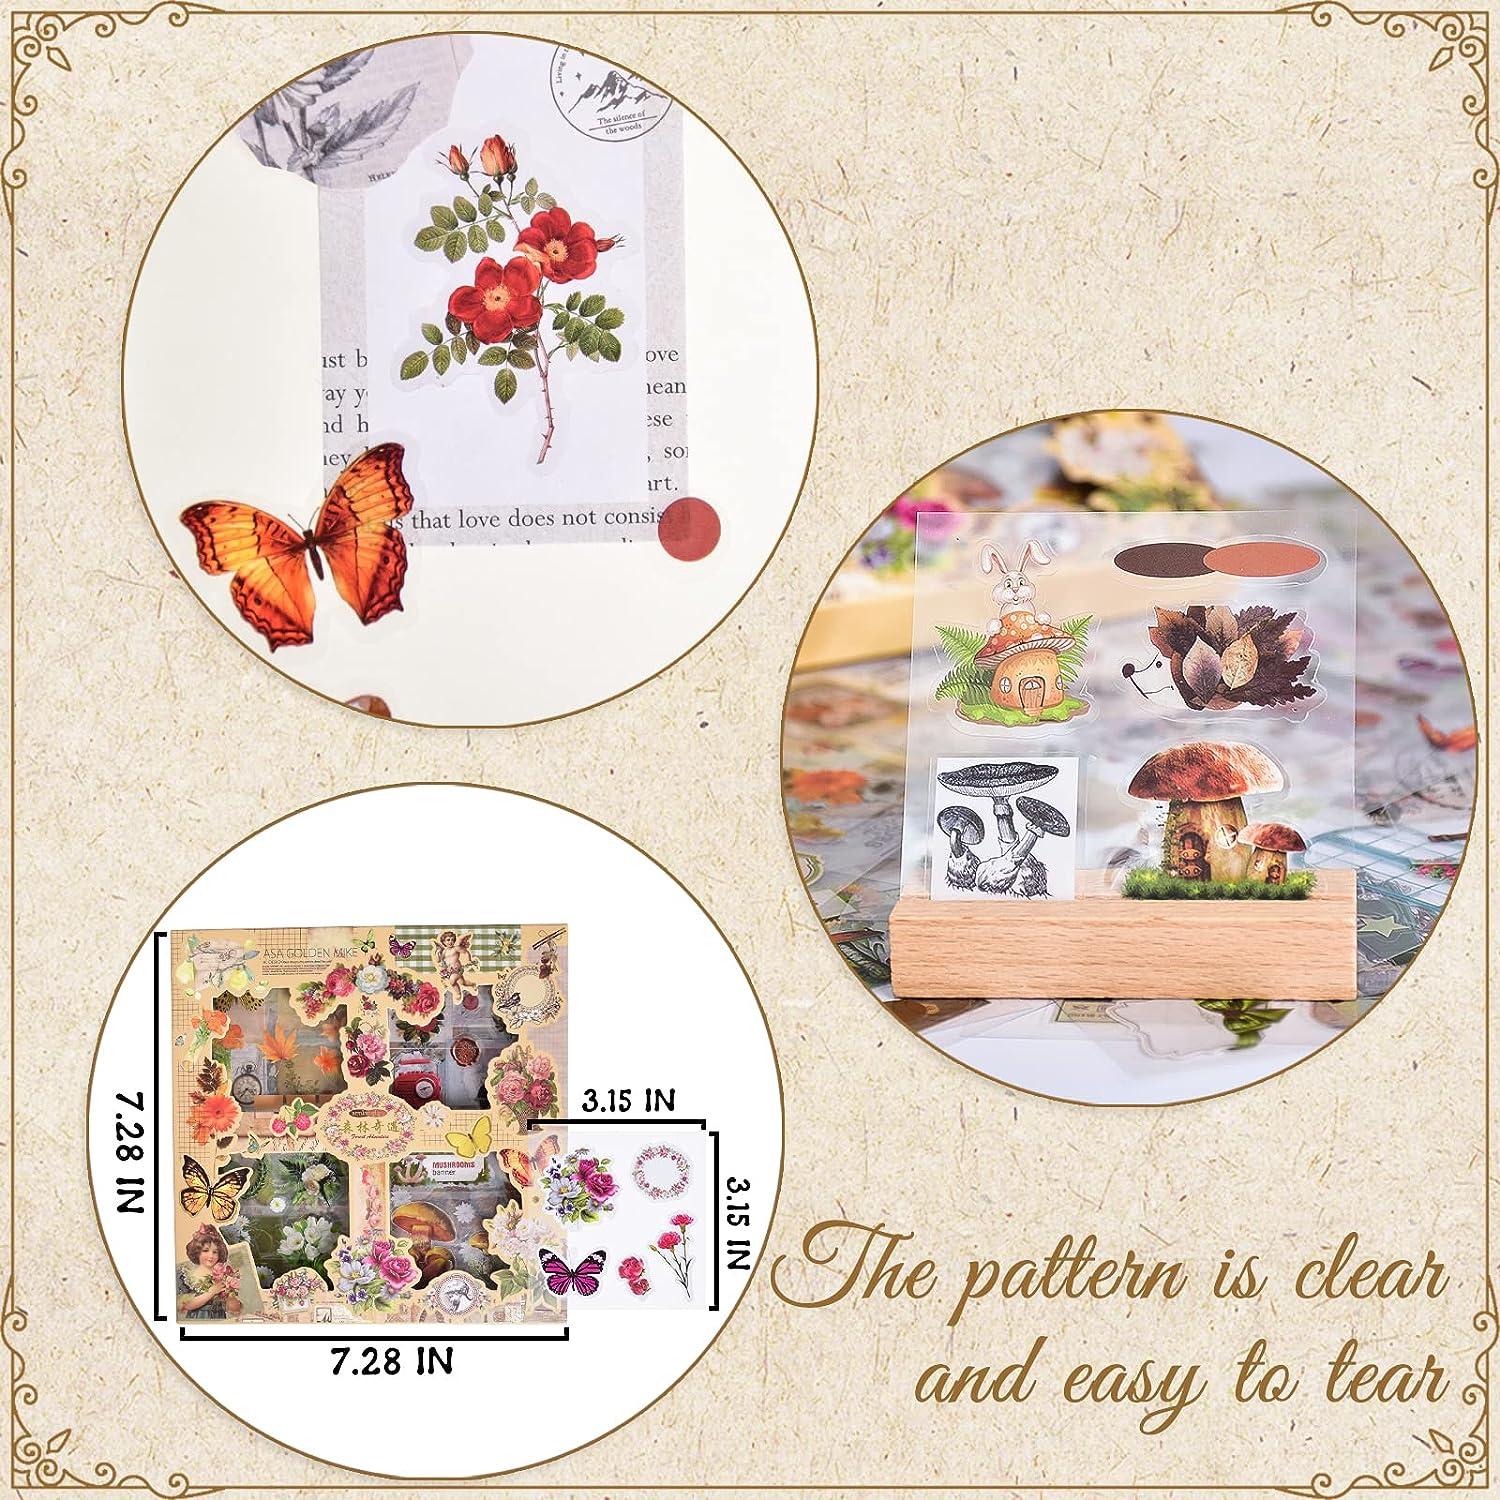 20 Sheets Vintage Aesthetic Stickers Book for Journaling - Transparent PET  Retro Flowers Floral Butterflies Mushrooms Decorative Stickers Decal Set